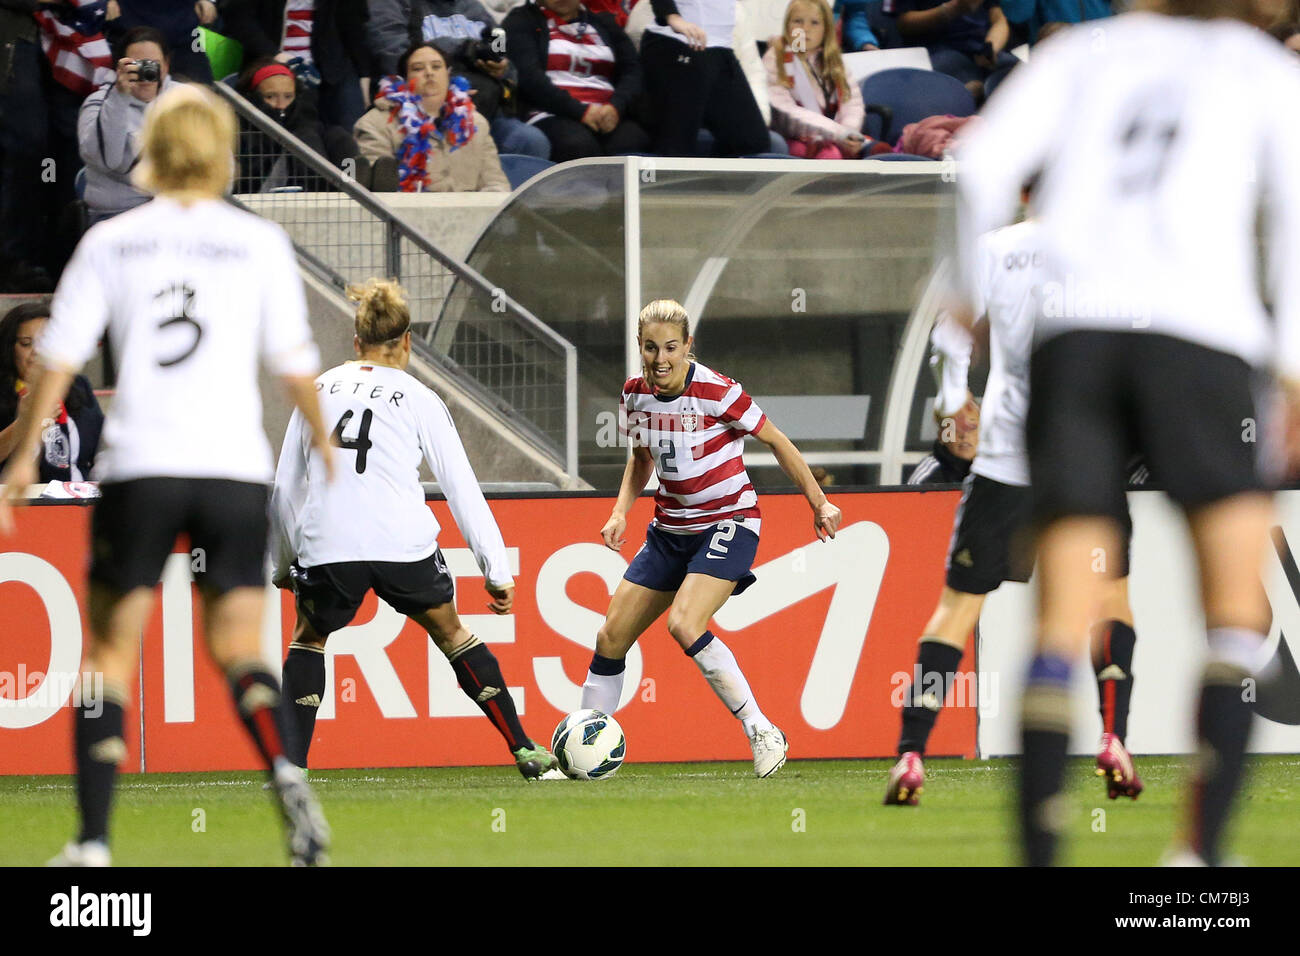 20.10.2012. Chicago, USA.  Heather Mitts (USA) (2). The United States Women's National Team played the Germany Women's National Team at Toyota Park in Bridgeview, Illinois in a women's international friendly soccer match. The game ended in a 1-1 tie. Stock Photo